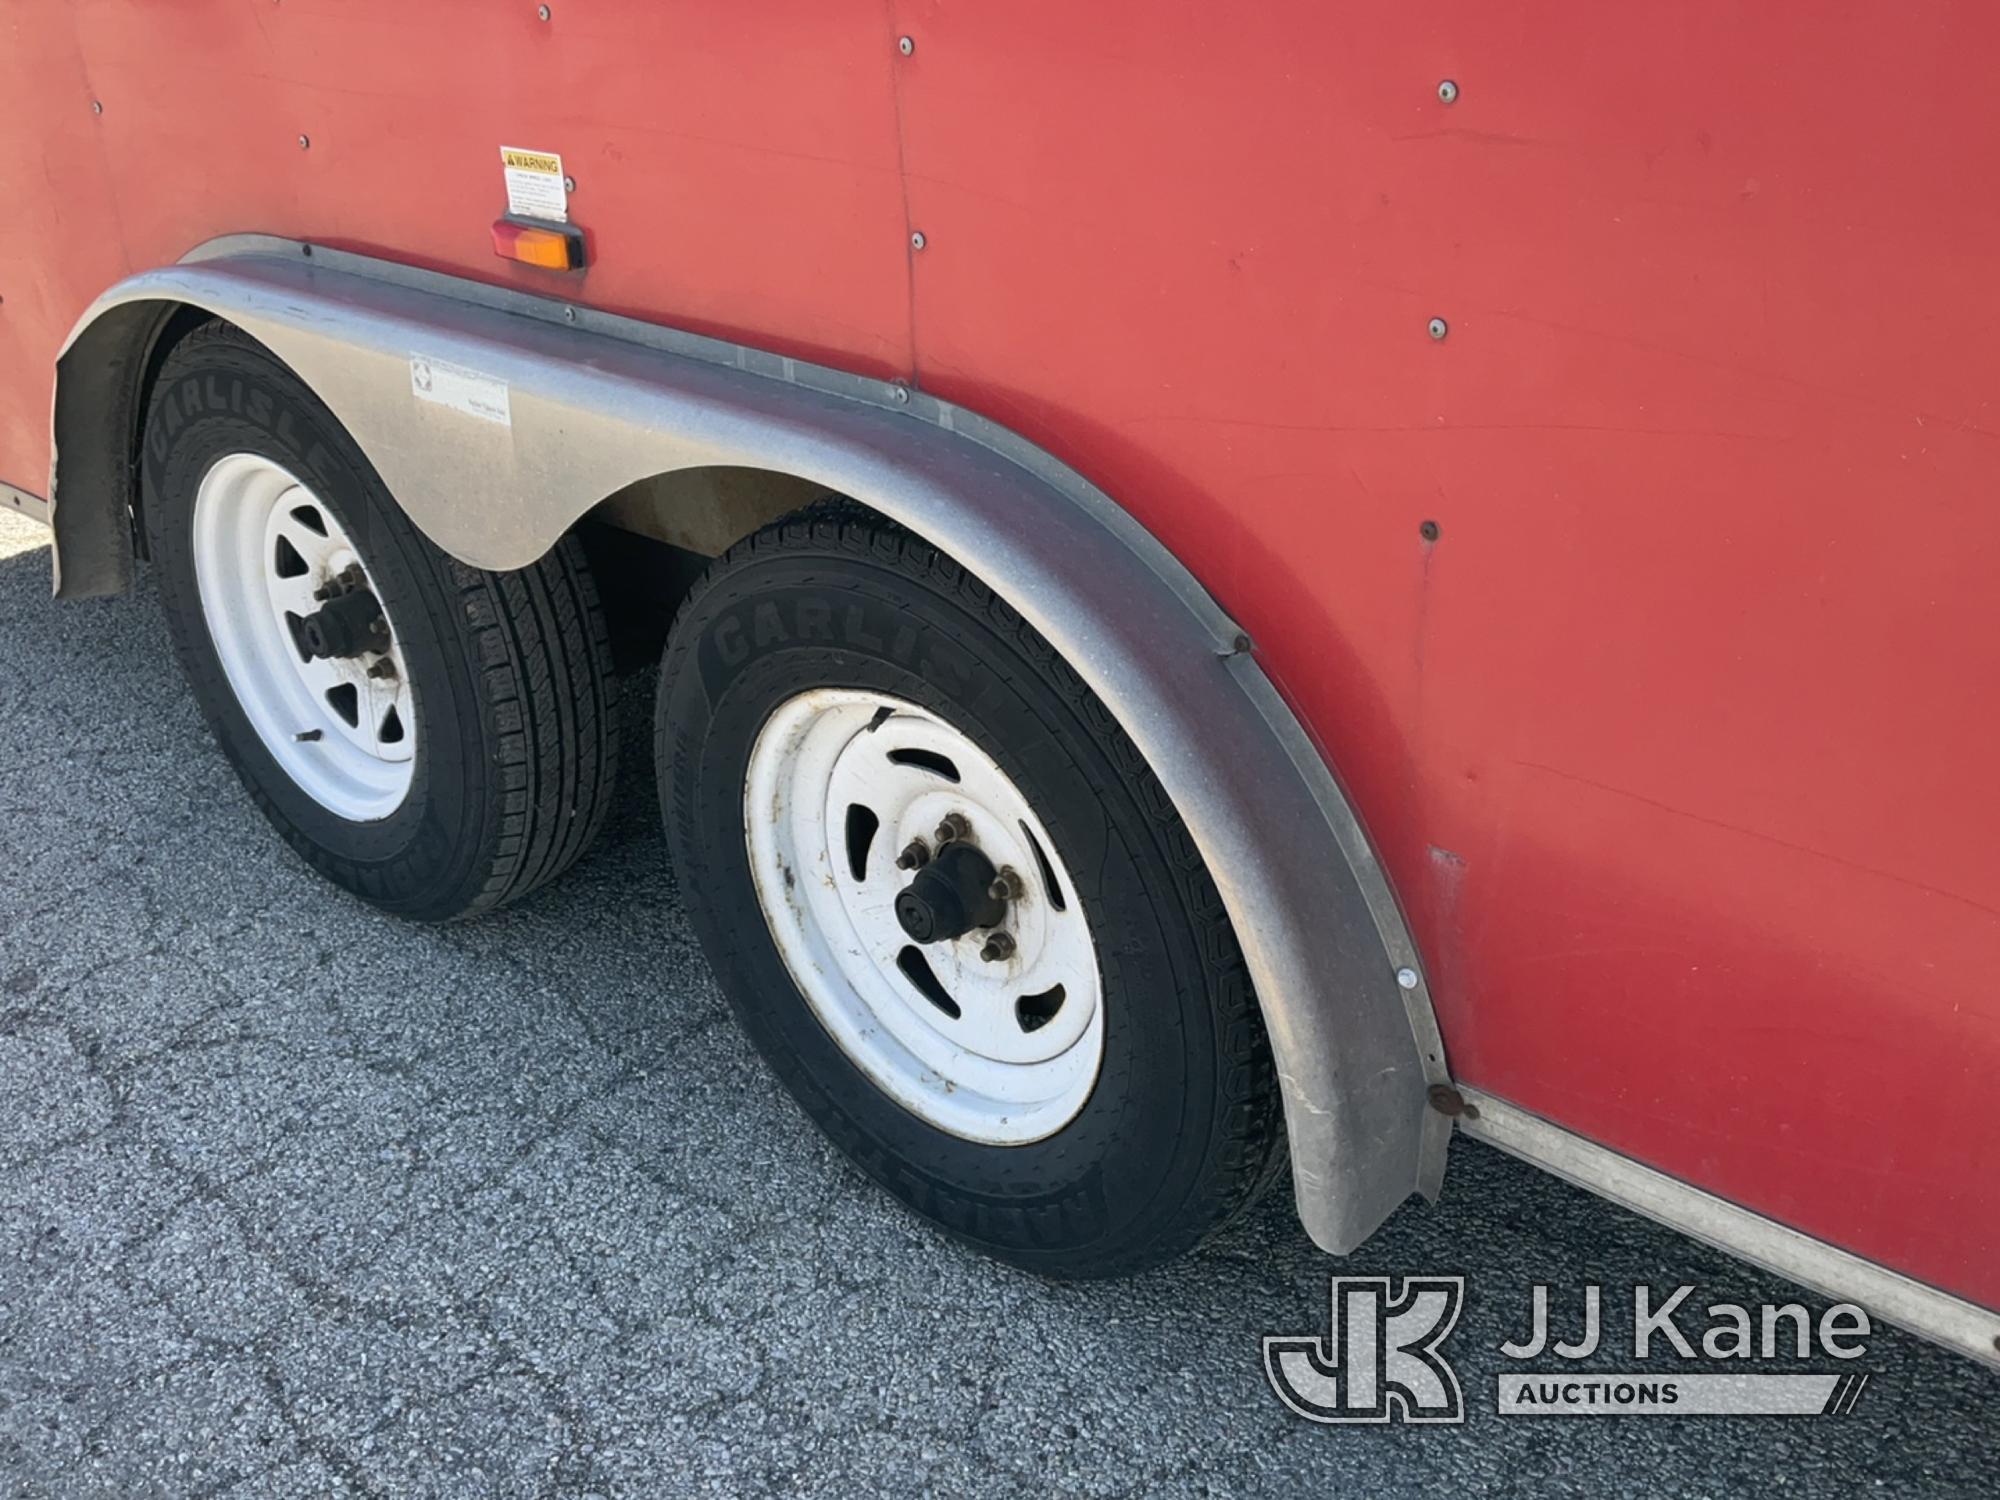 (South Beloit, IL) 2006 Royal Cargo, LLC T/A Enclosed Cargo Trailer Side Door Does Not Work